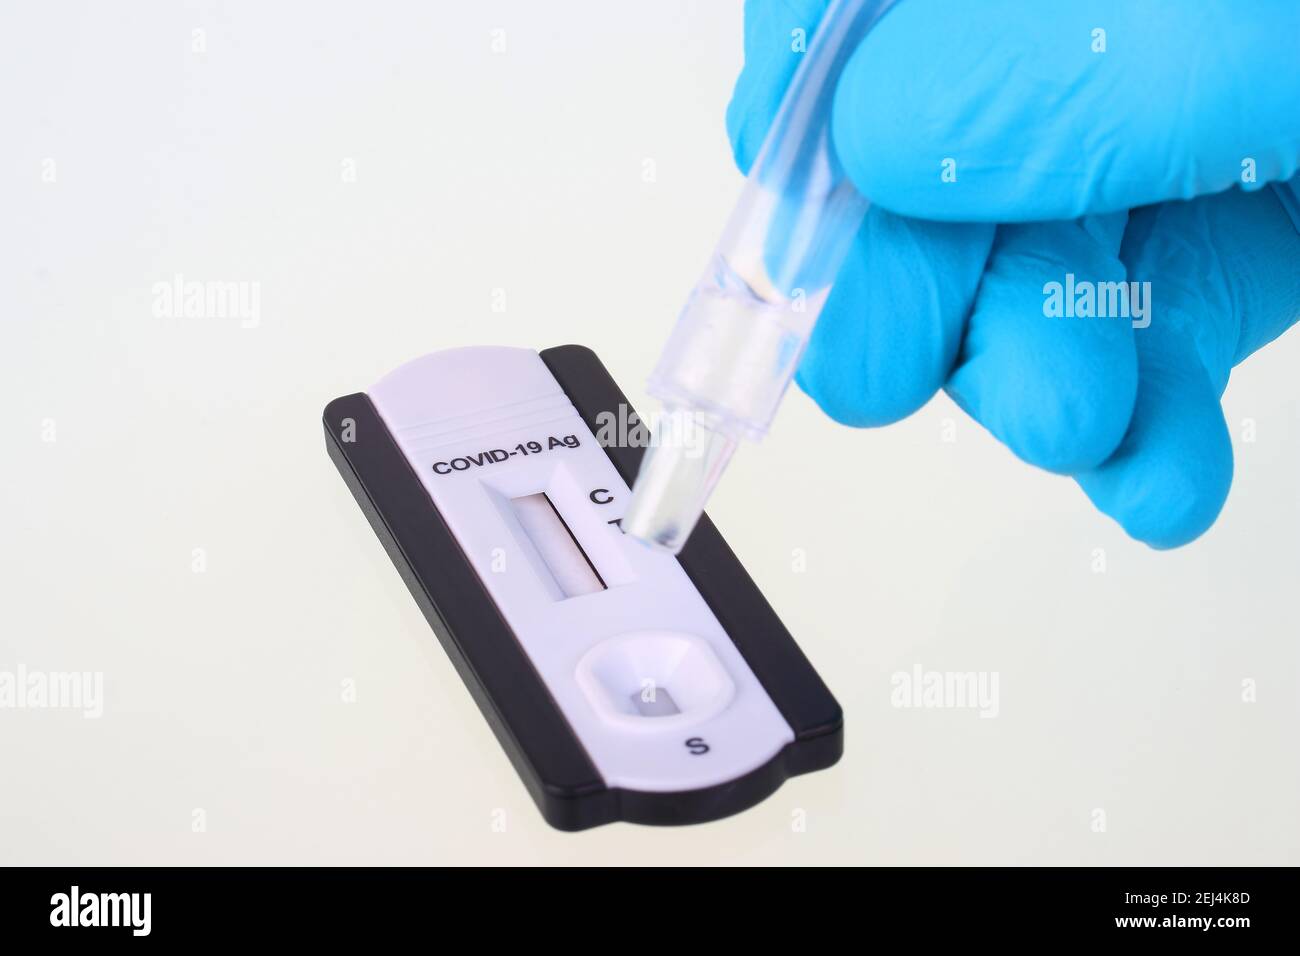 Covid 19 PCR Rapid Test, Corona, test solution is dropped onto sample field Stock Photo